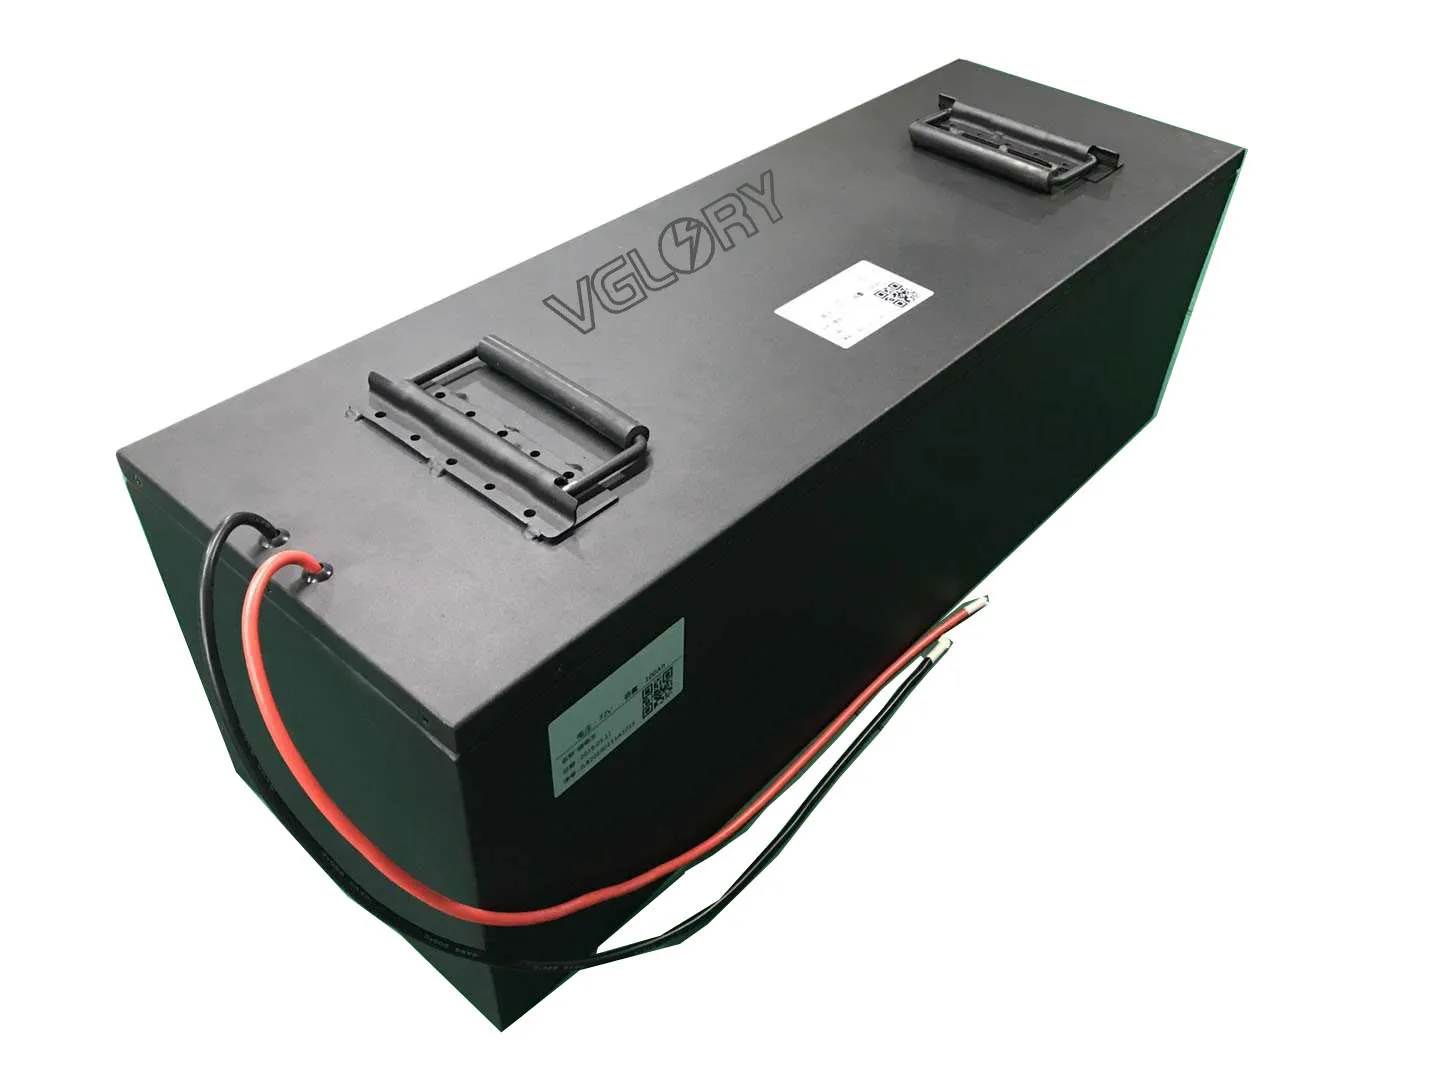 Compact size high density 12 volt deep cycle lithium battery